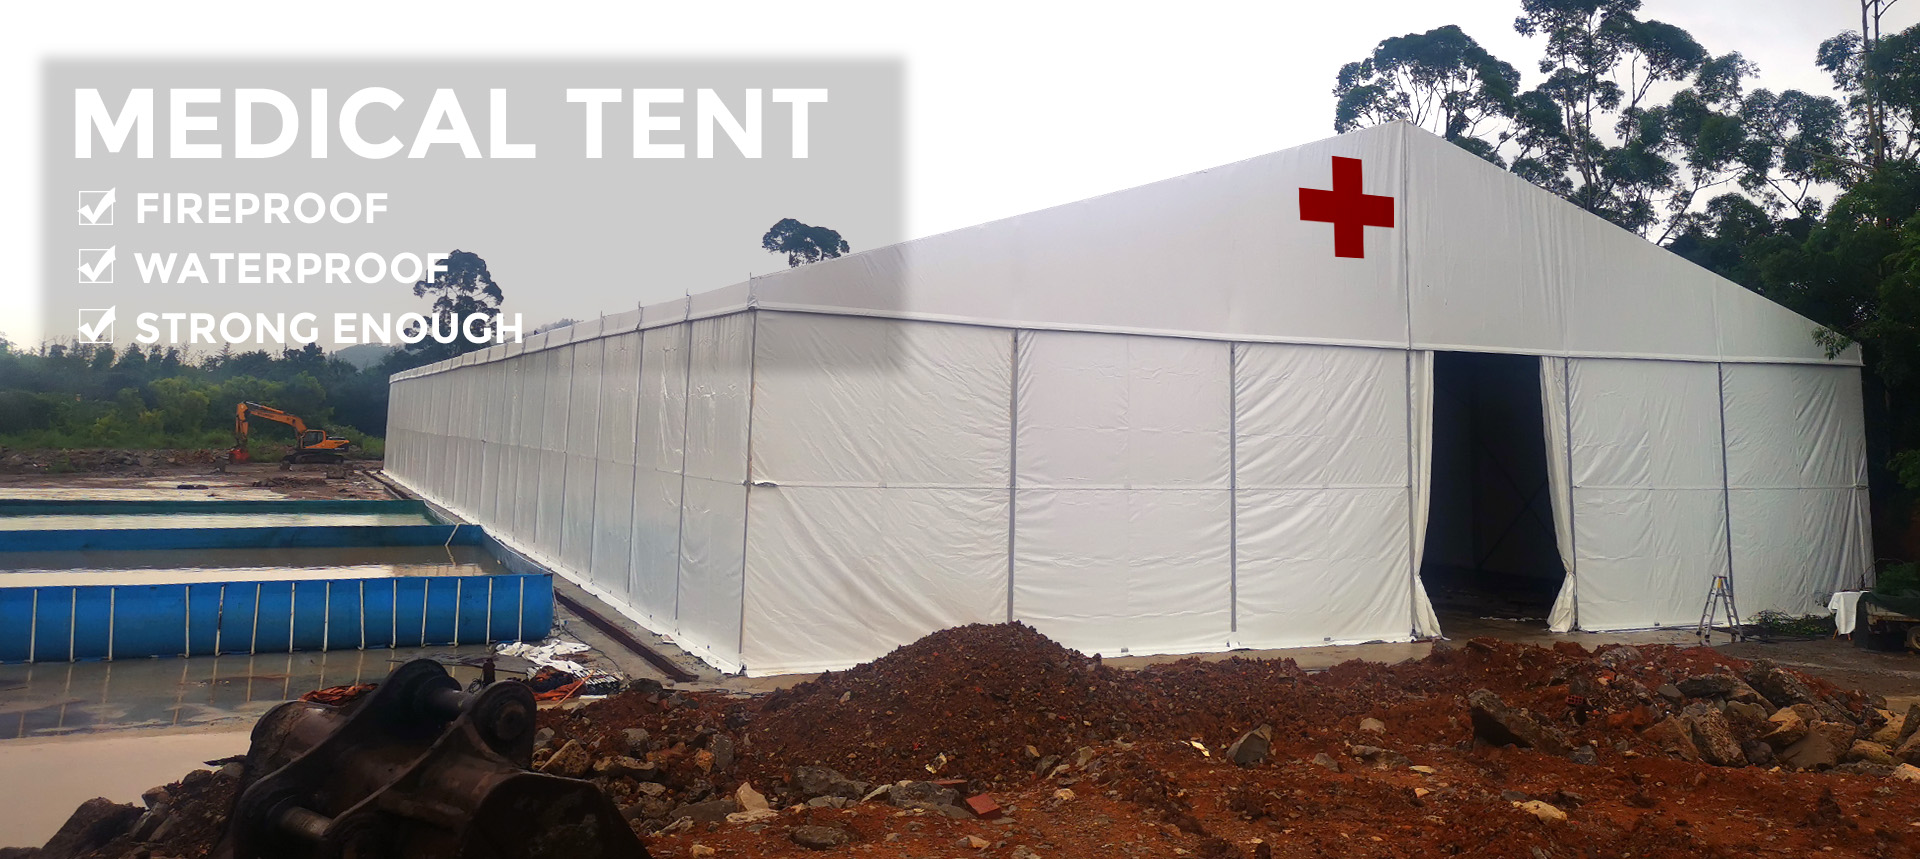 Go for relief tent